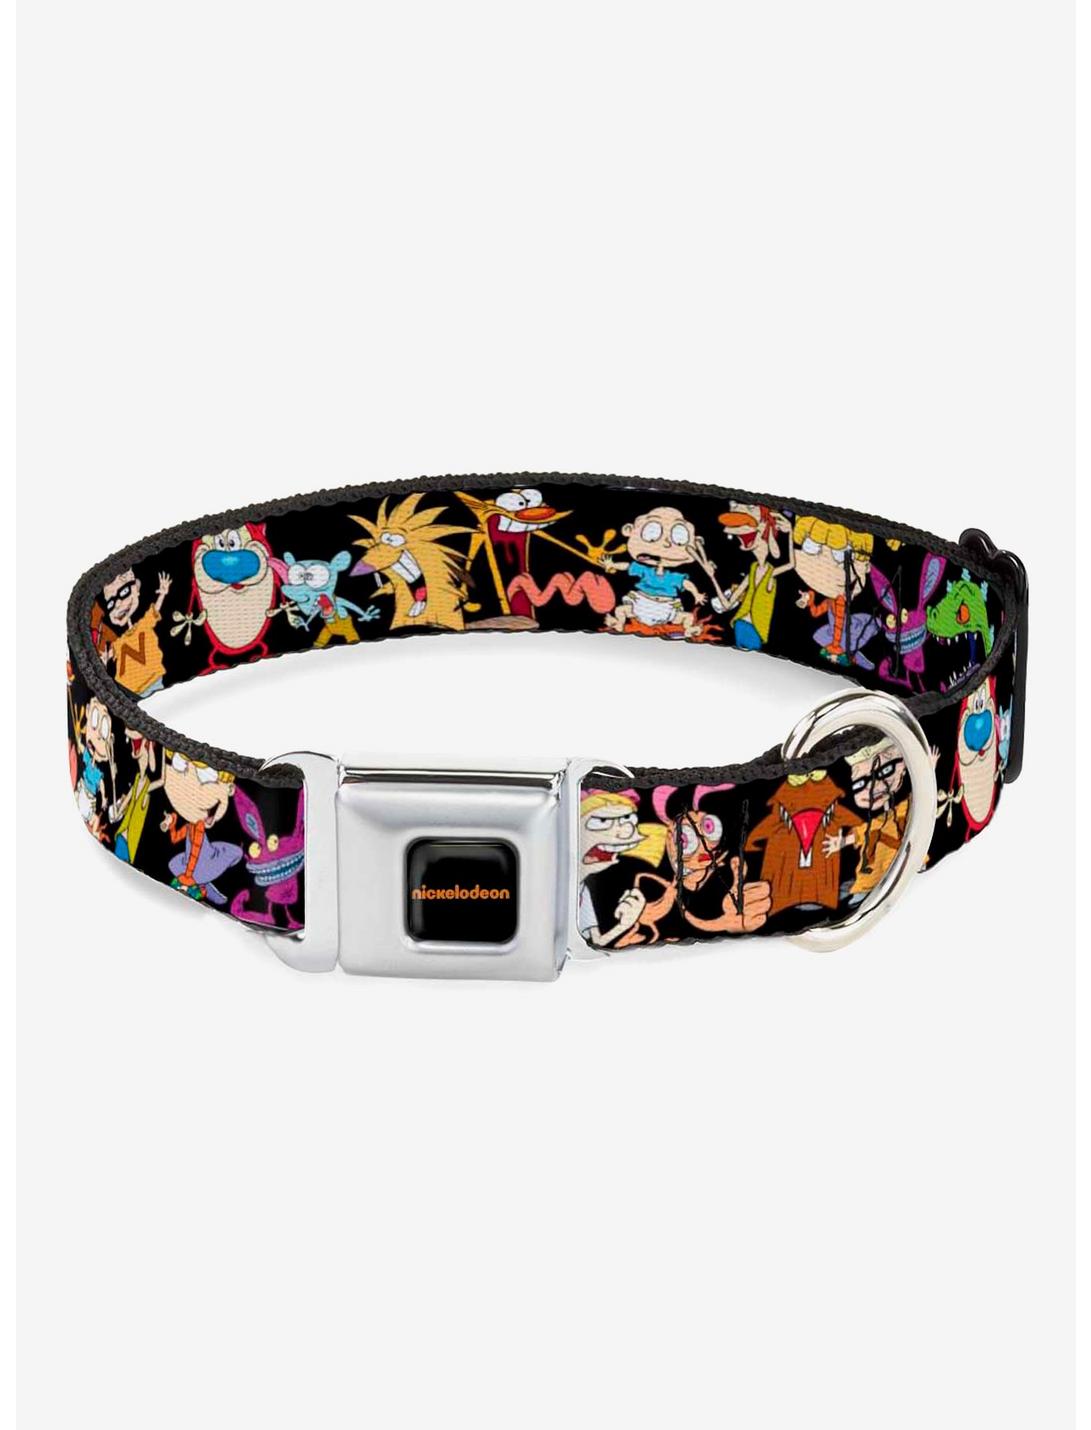 Nickelodeon 90's 13 Character Poses Dog Collar Seatbelt Buckle, MULTICOLOR, hi-res